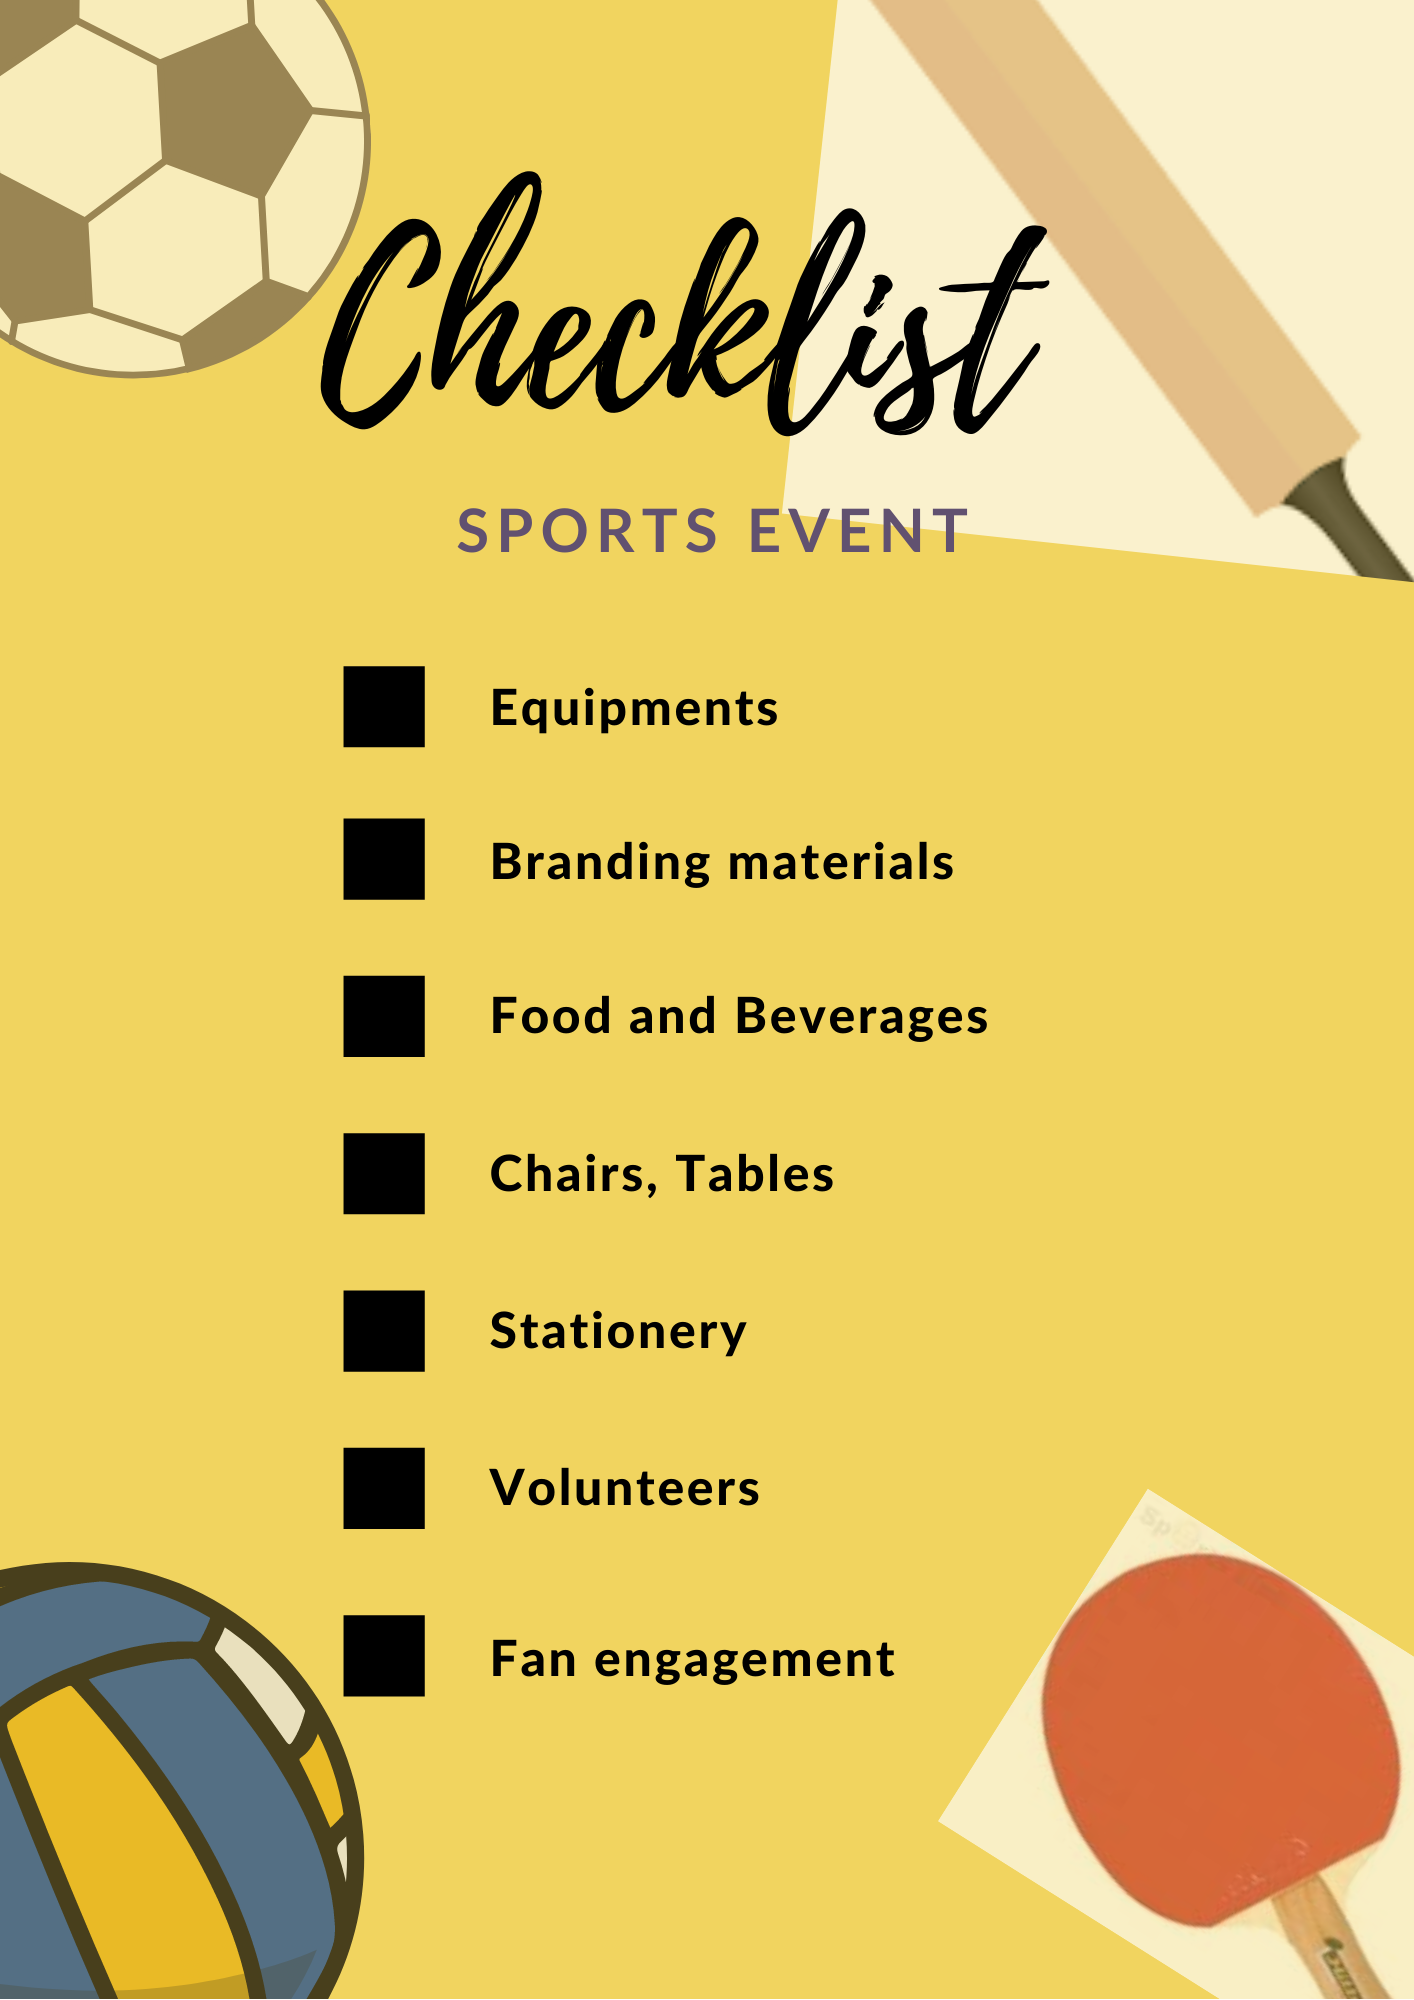 Checklist of things you need to have for a sports event